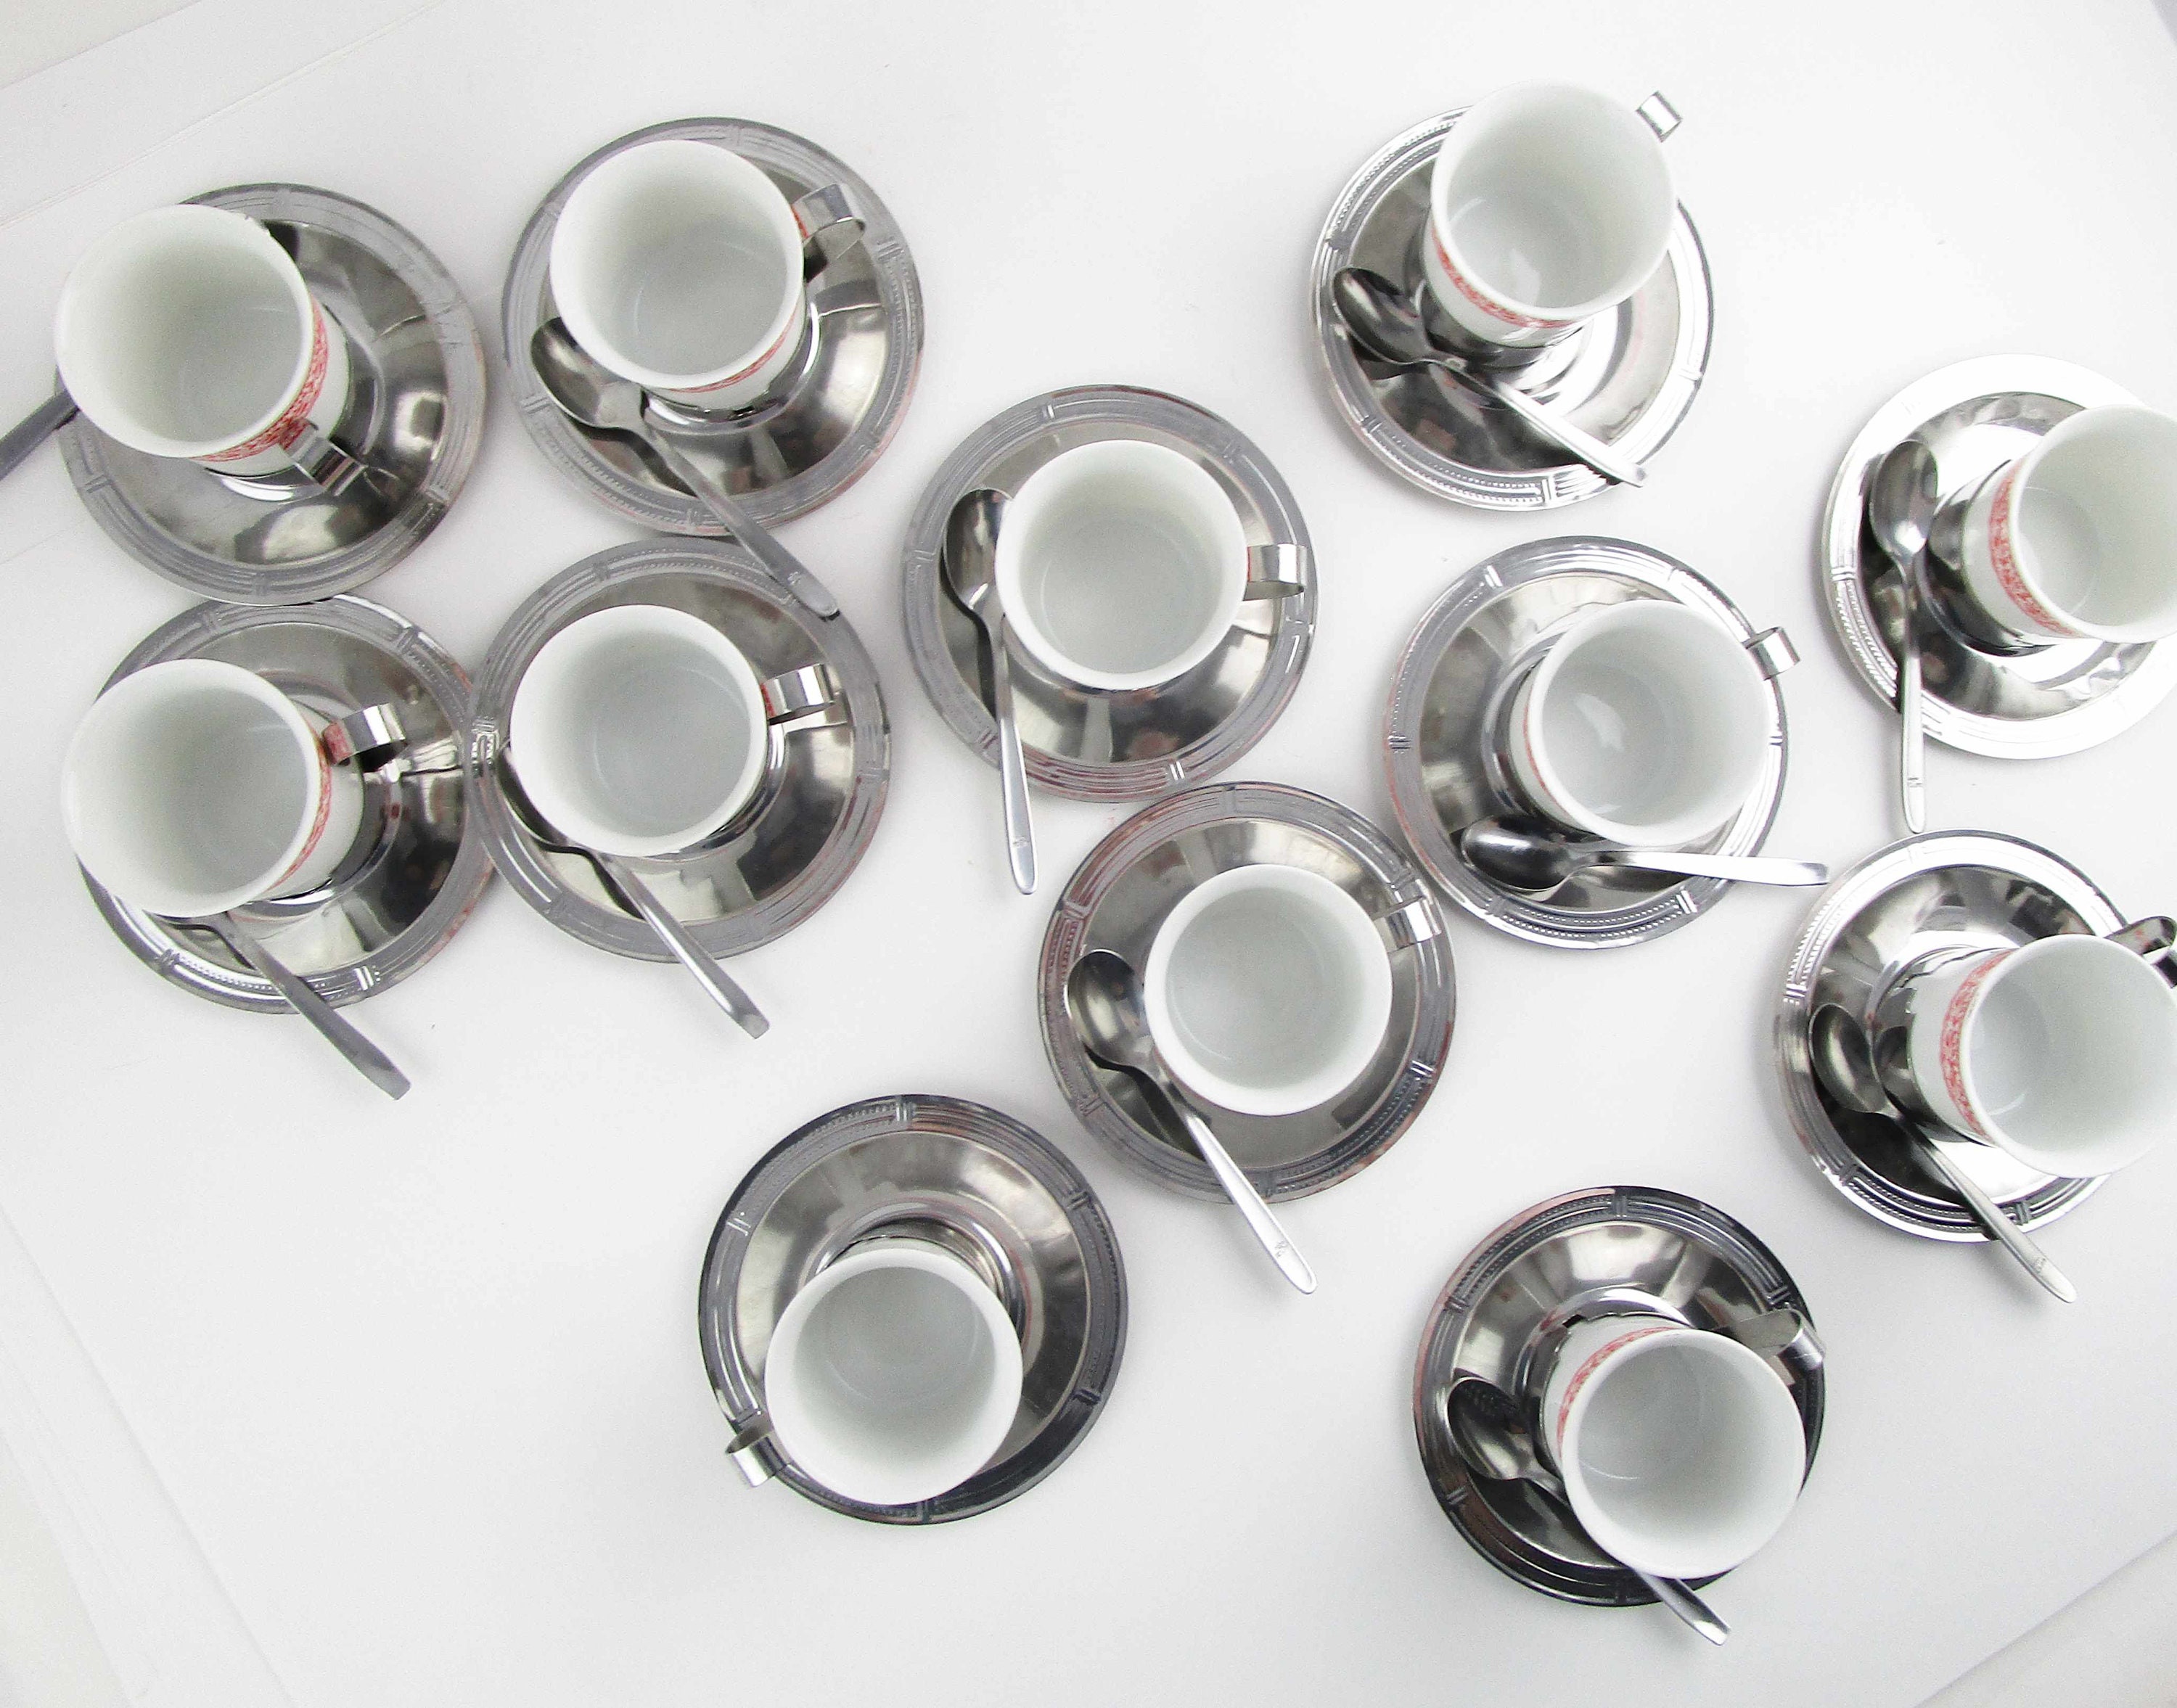 Twelve 12 Espresso Cups Made in Italy 'inoxriv' Brand Porcelain Cups in  Stainless Holders With Spoon and Saucer 